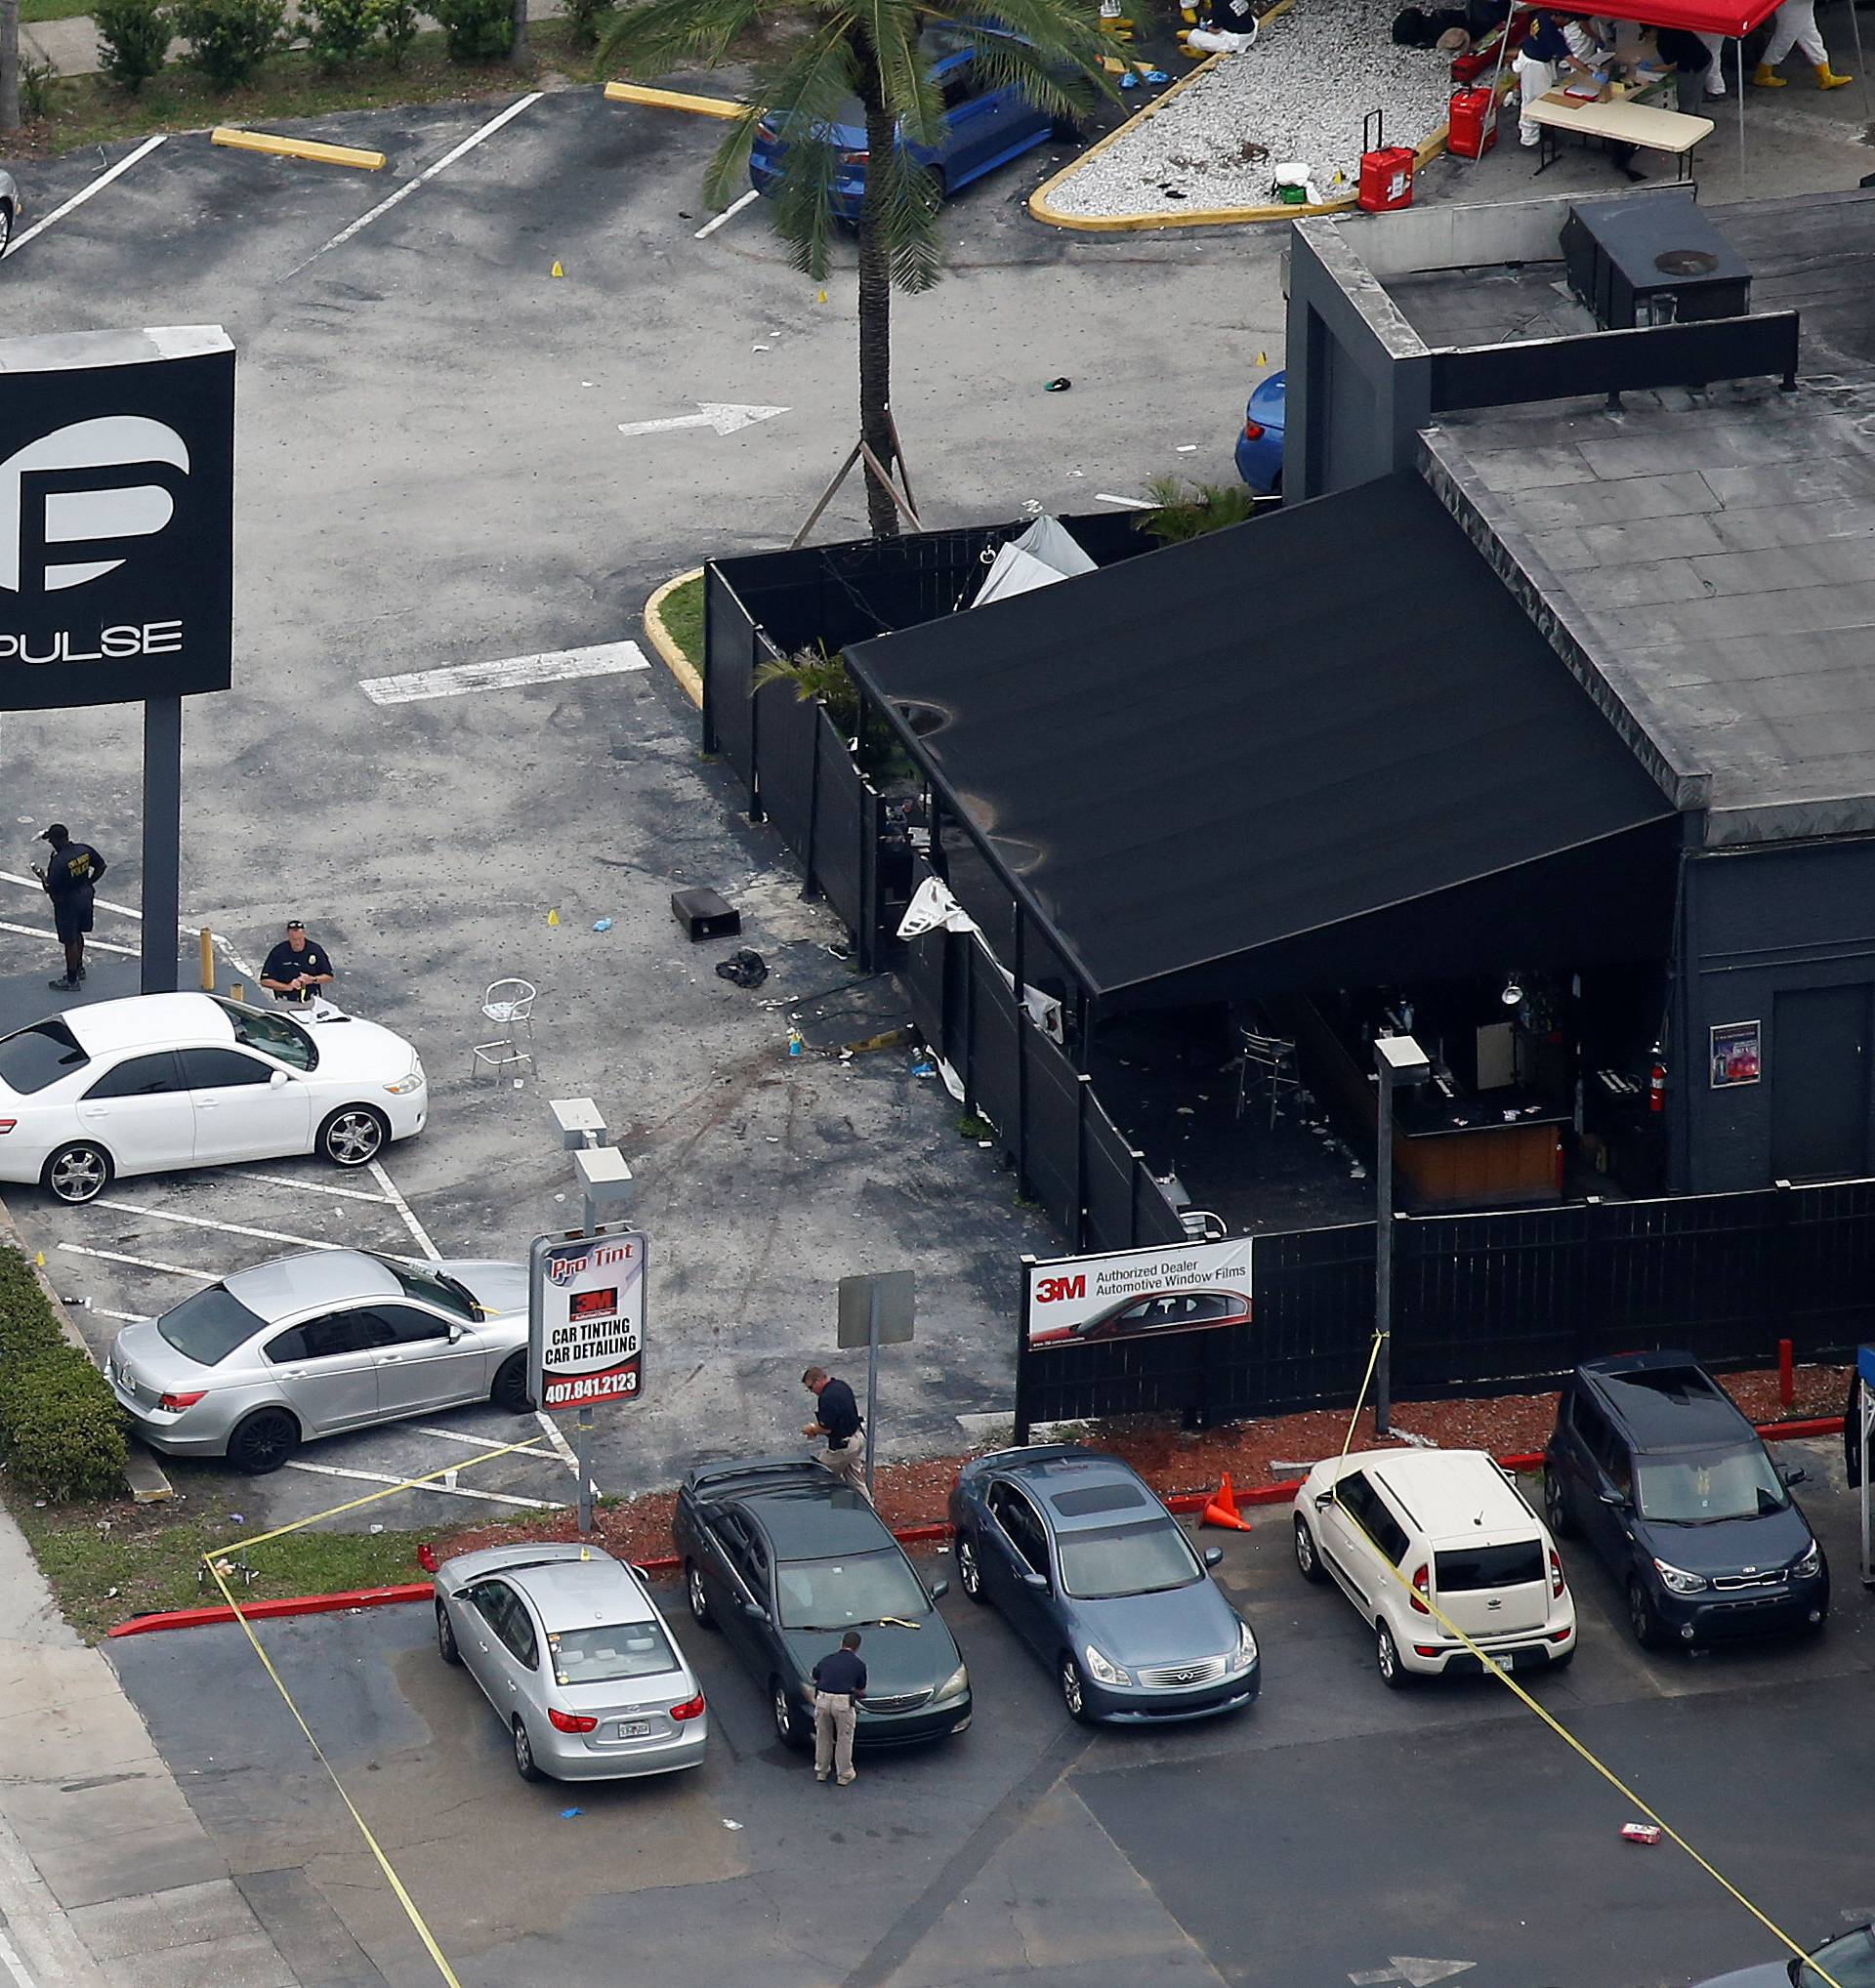 Investigators work the scene following a mass shooting at the Pulse gay nightclub in Orlando Florida